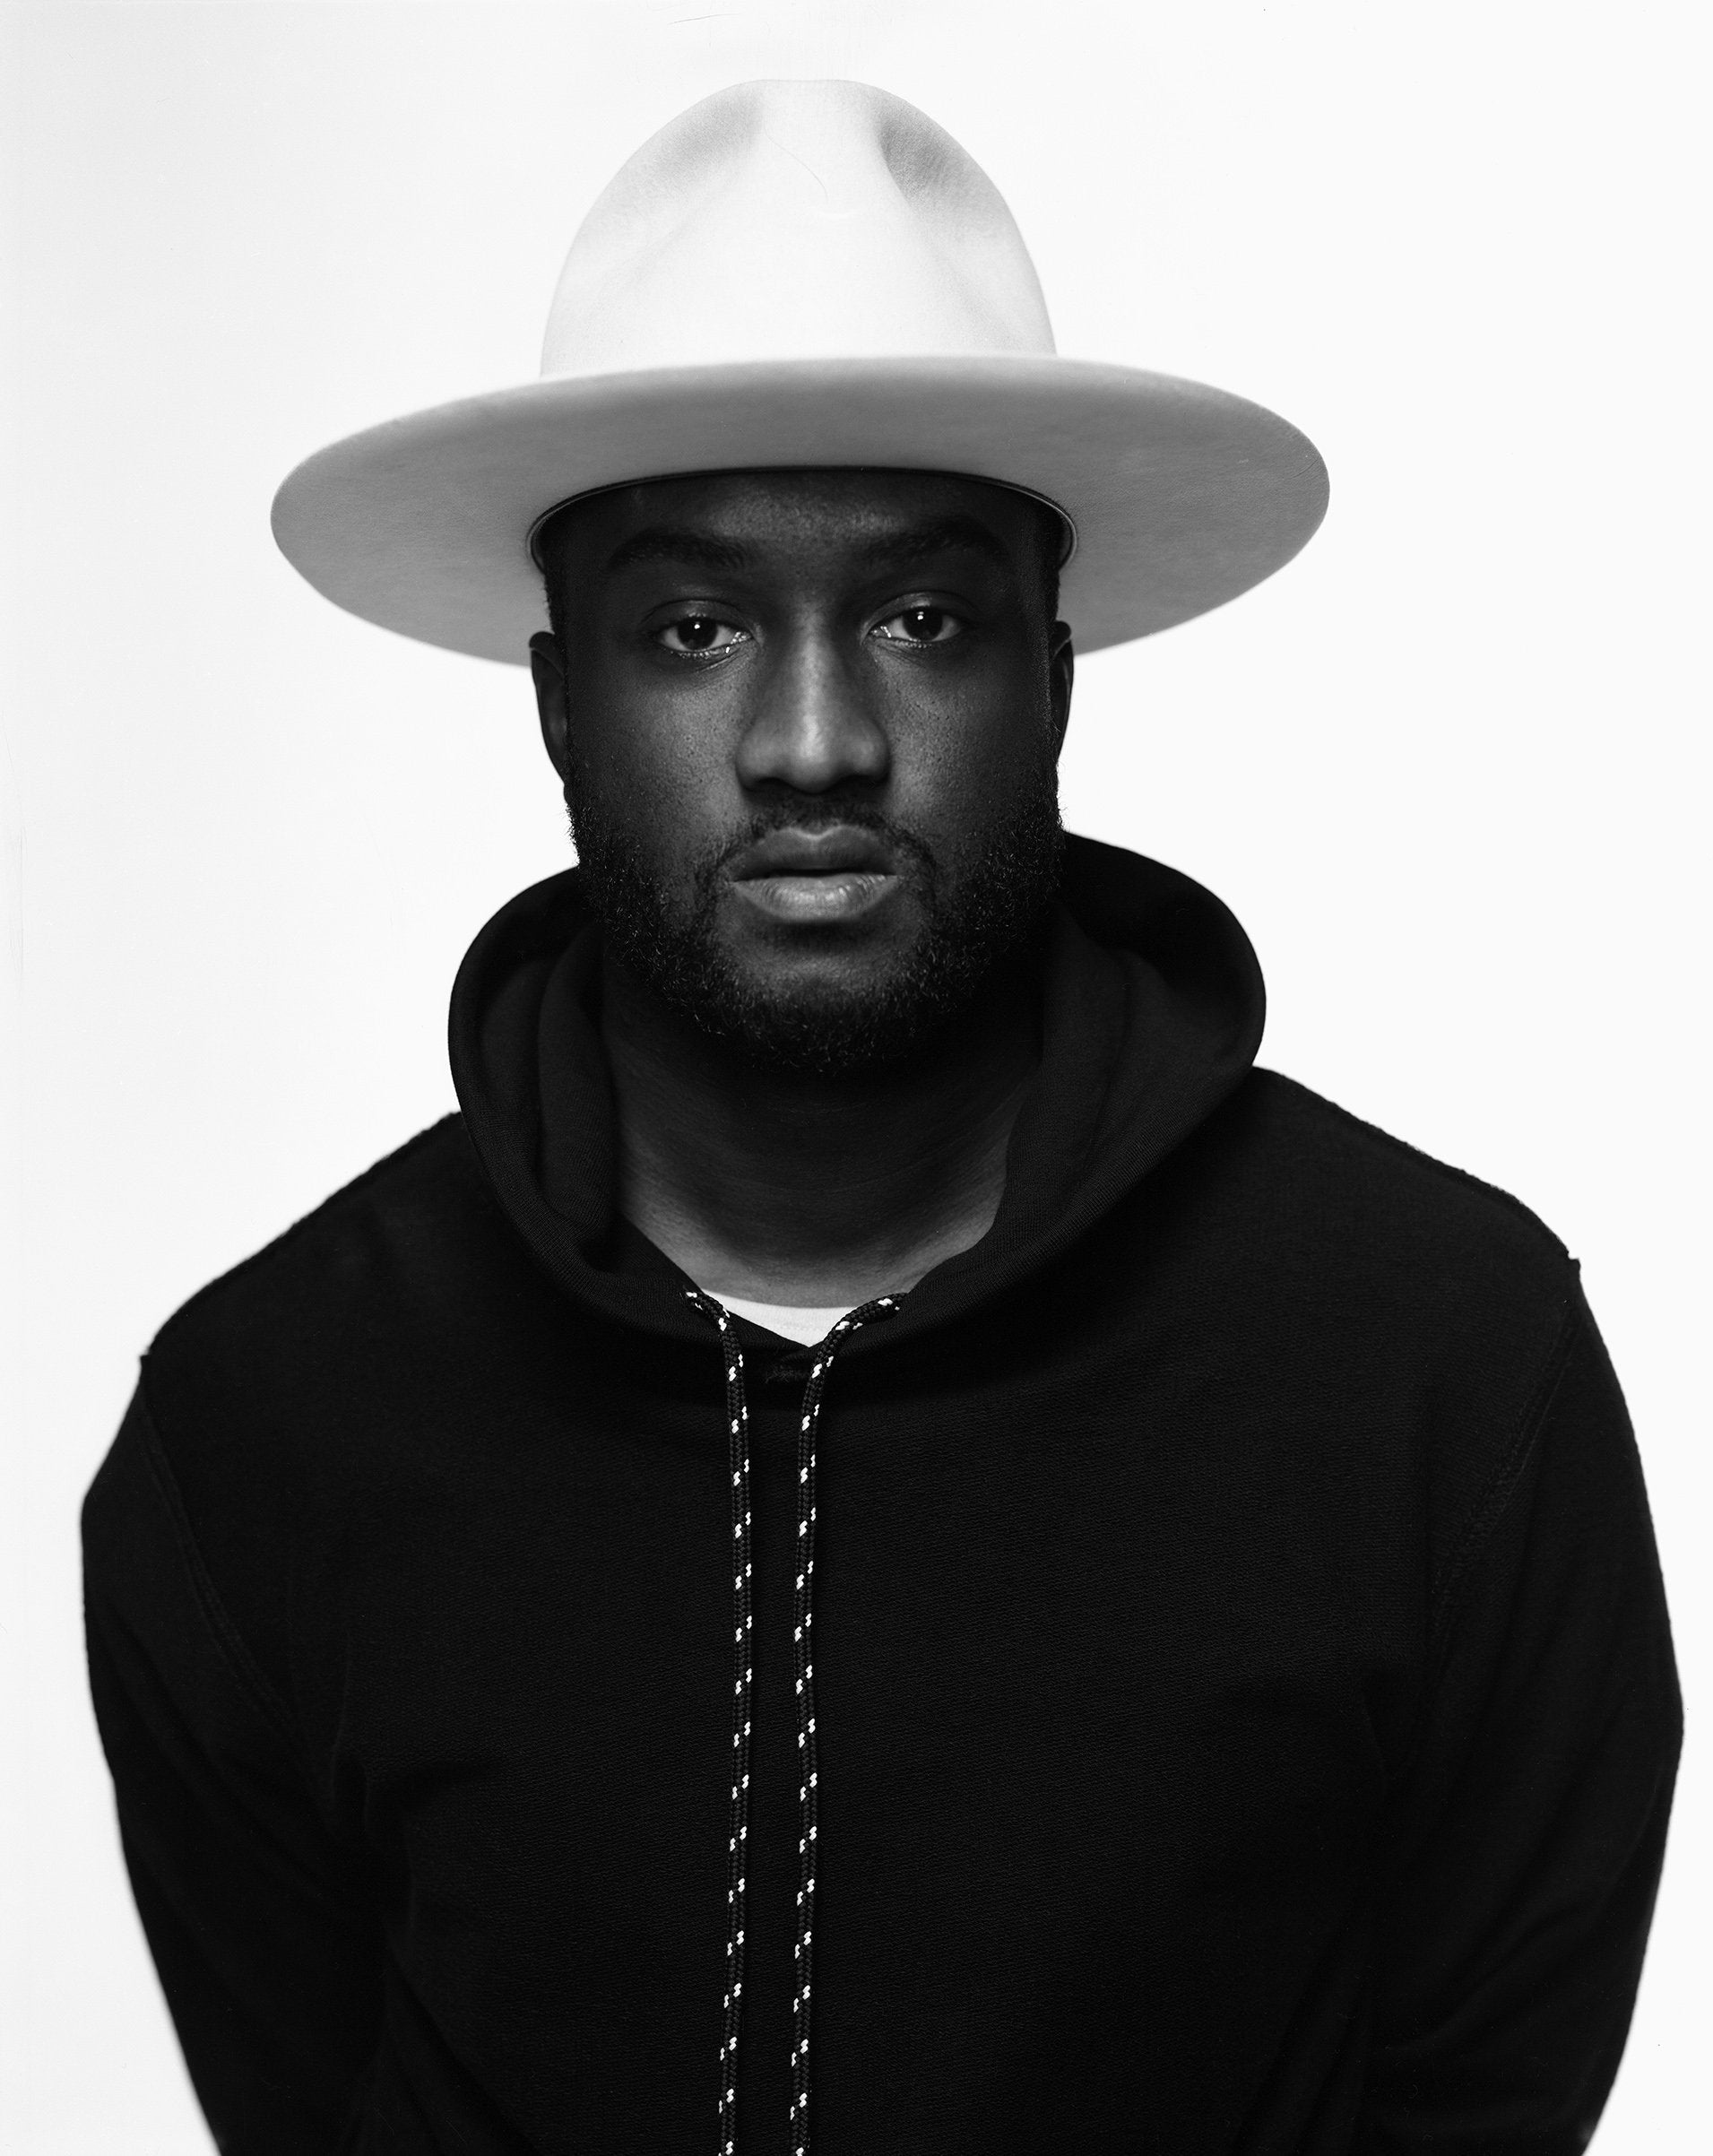 VIRGIL ABLOH GIVES CAREER ADVICE FOR YOUNG CREATIVES